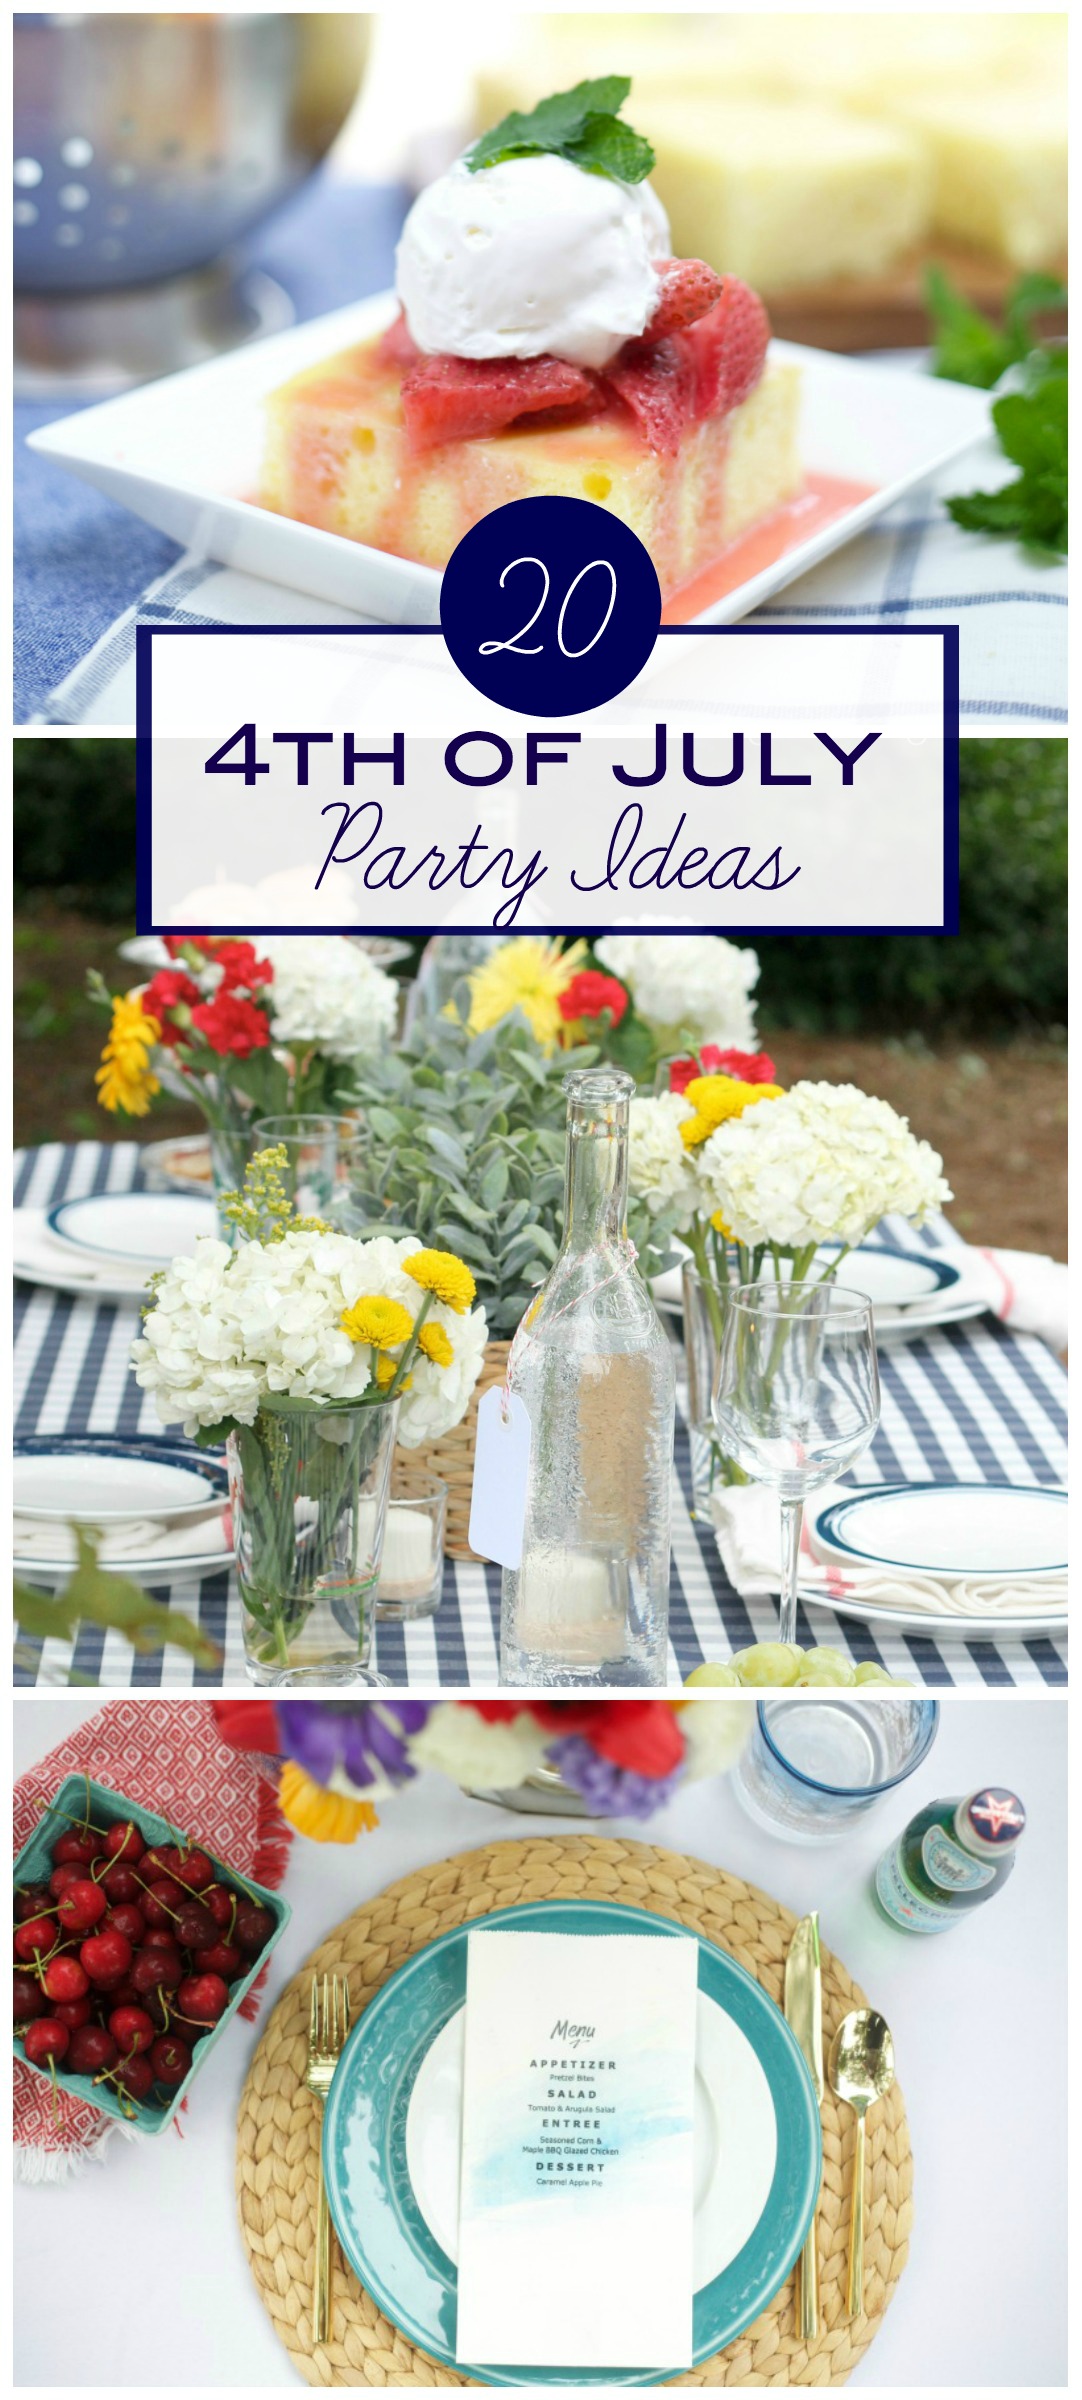 4th of July Party Ideas by PartiesforPennies.com